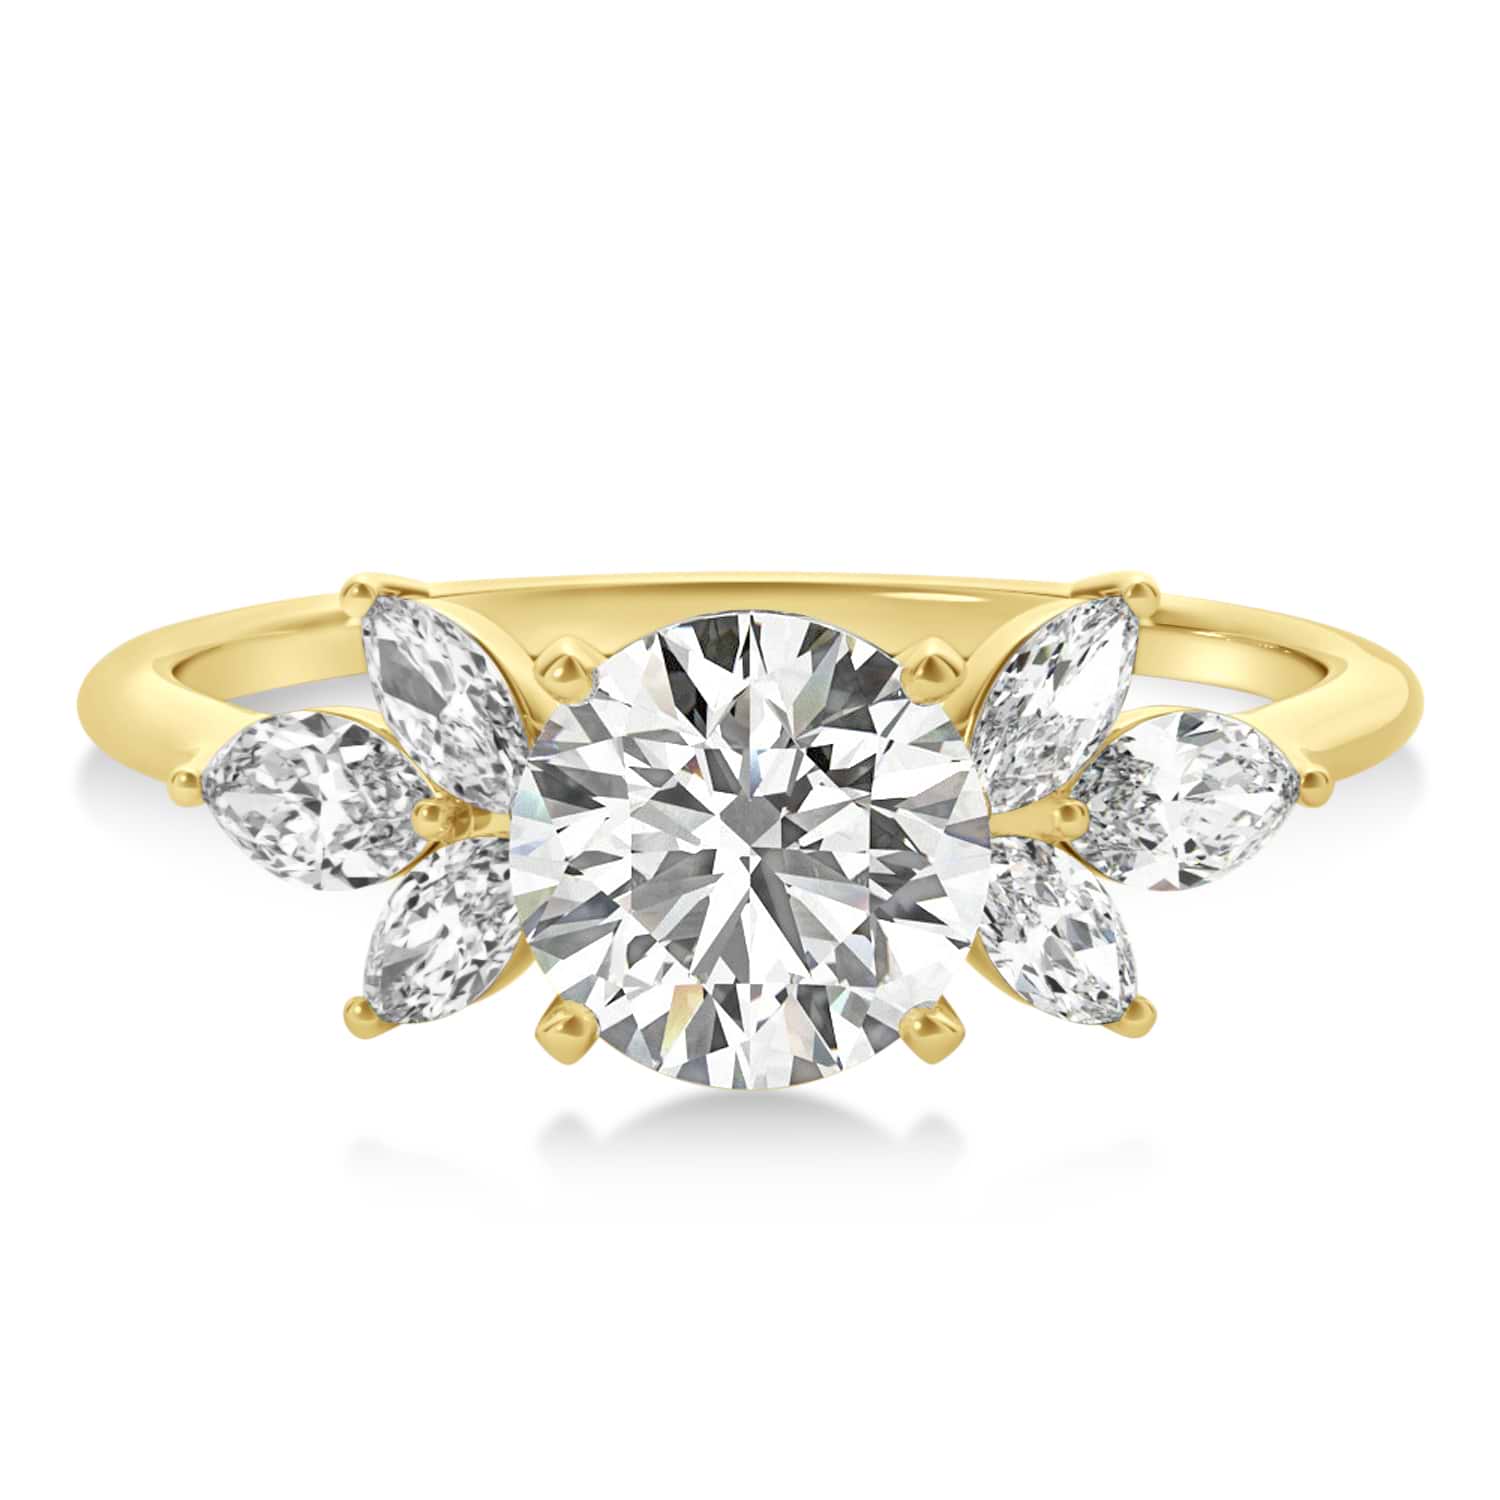 Diamond Marquise Floral Engagement Ring 14k Yellow Gold (0.50ct)